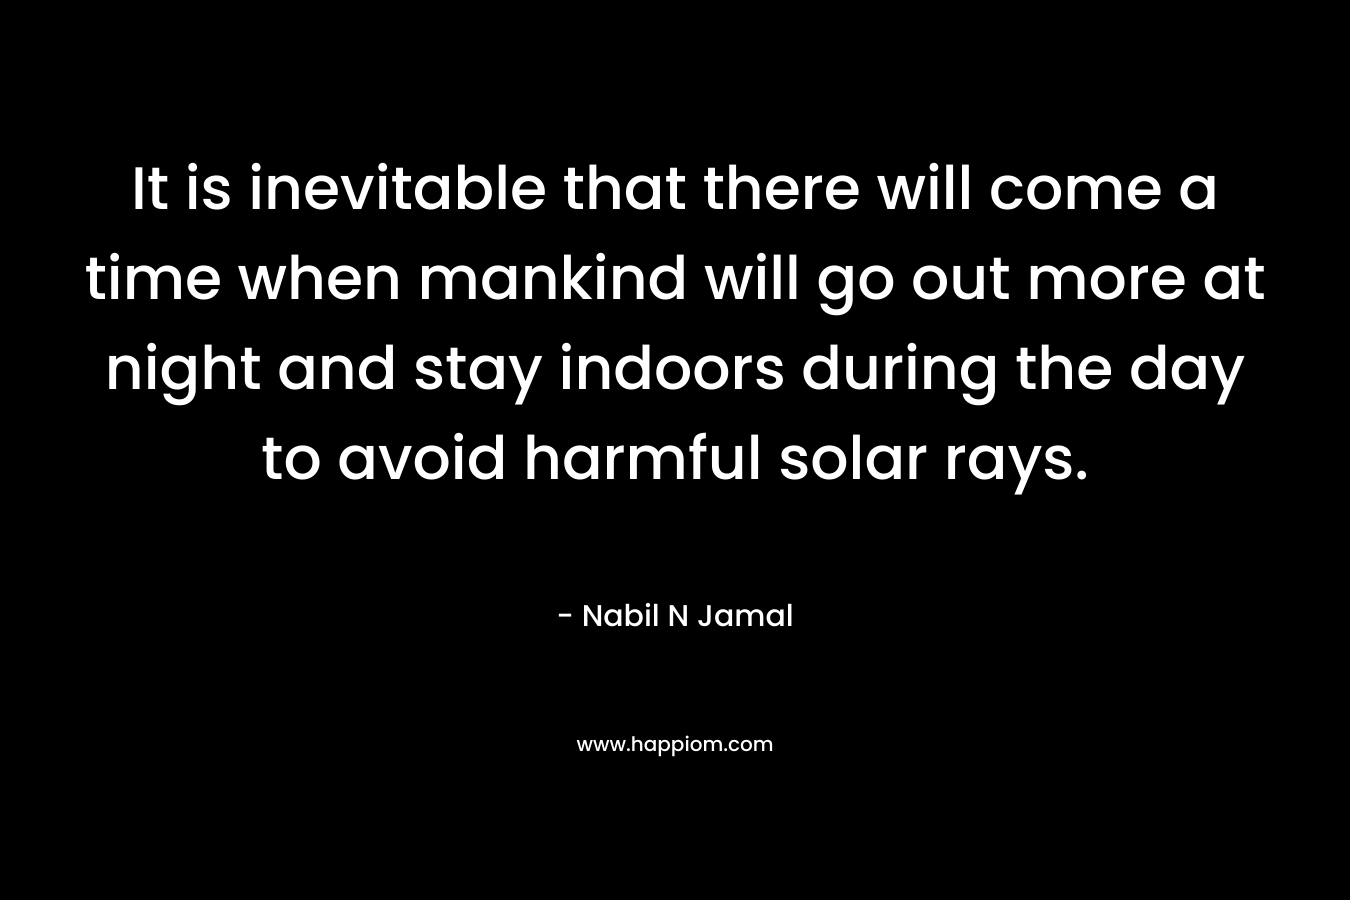 It is inevitable that there will come a time when mankind will go out more at night and stay indoors during the day to avoid harmful solar rays. – Nabil N Jamal